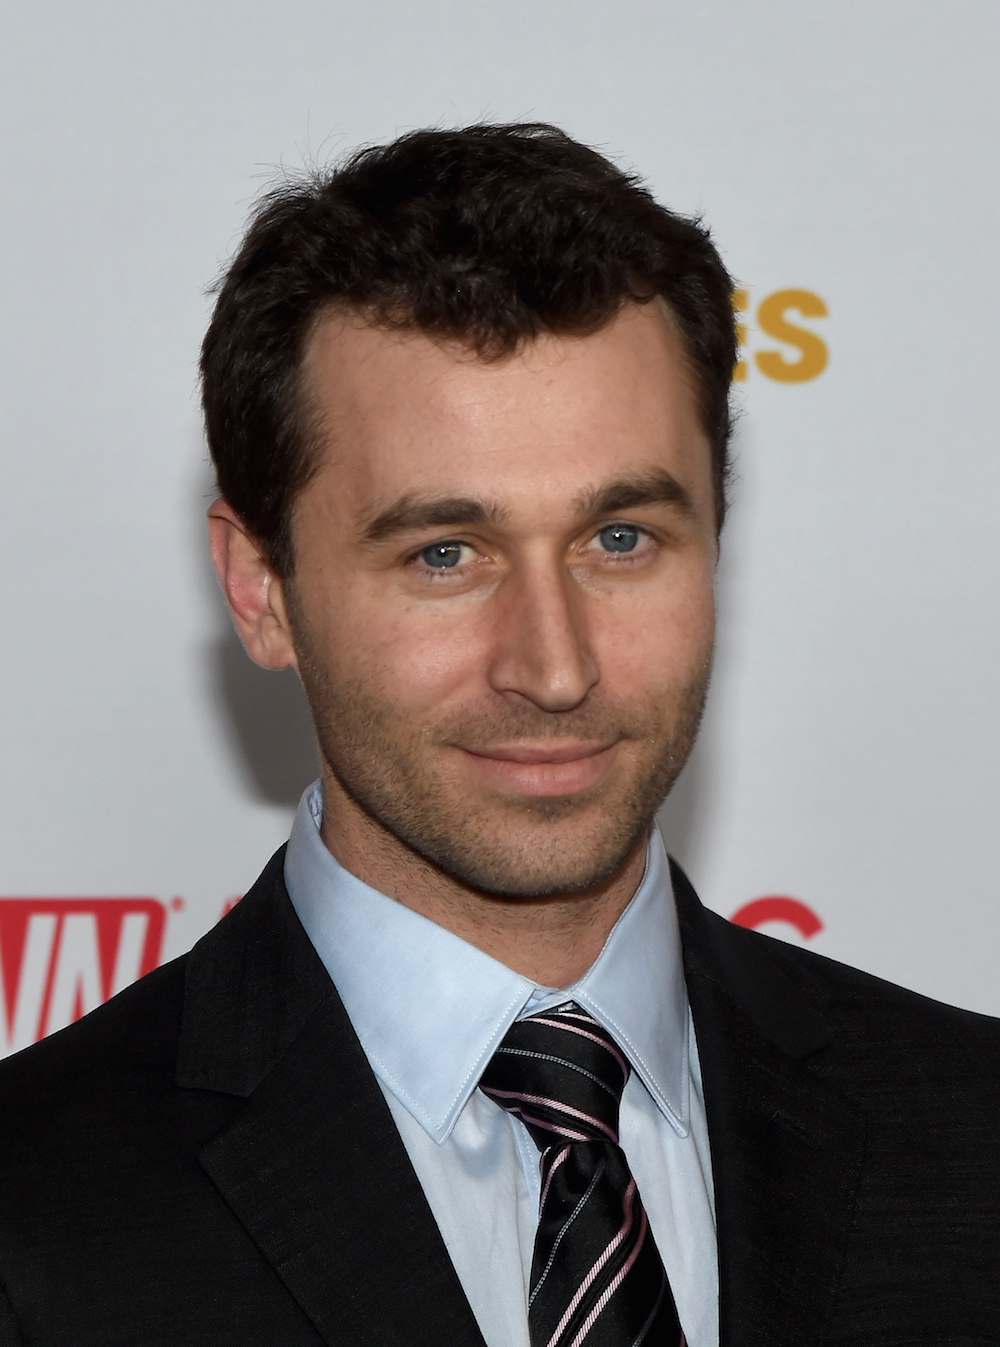 At the 2016 AVN Awards, the Only Dirty Words Were "James Deen" .